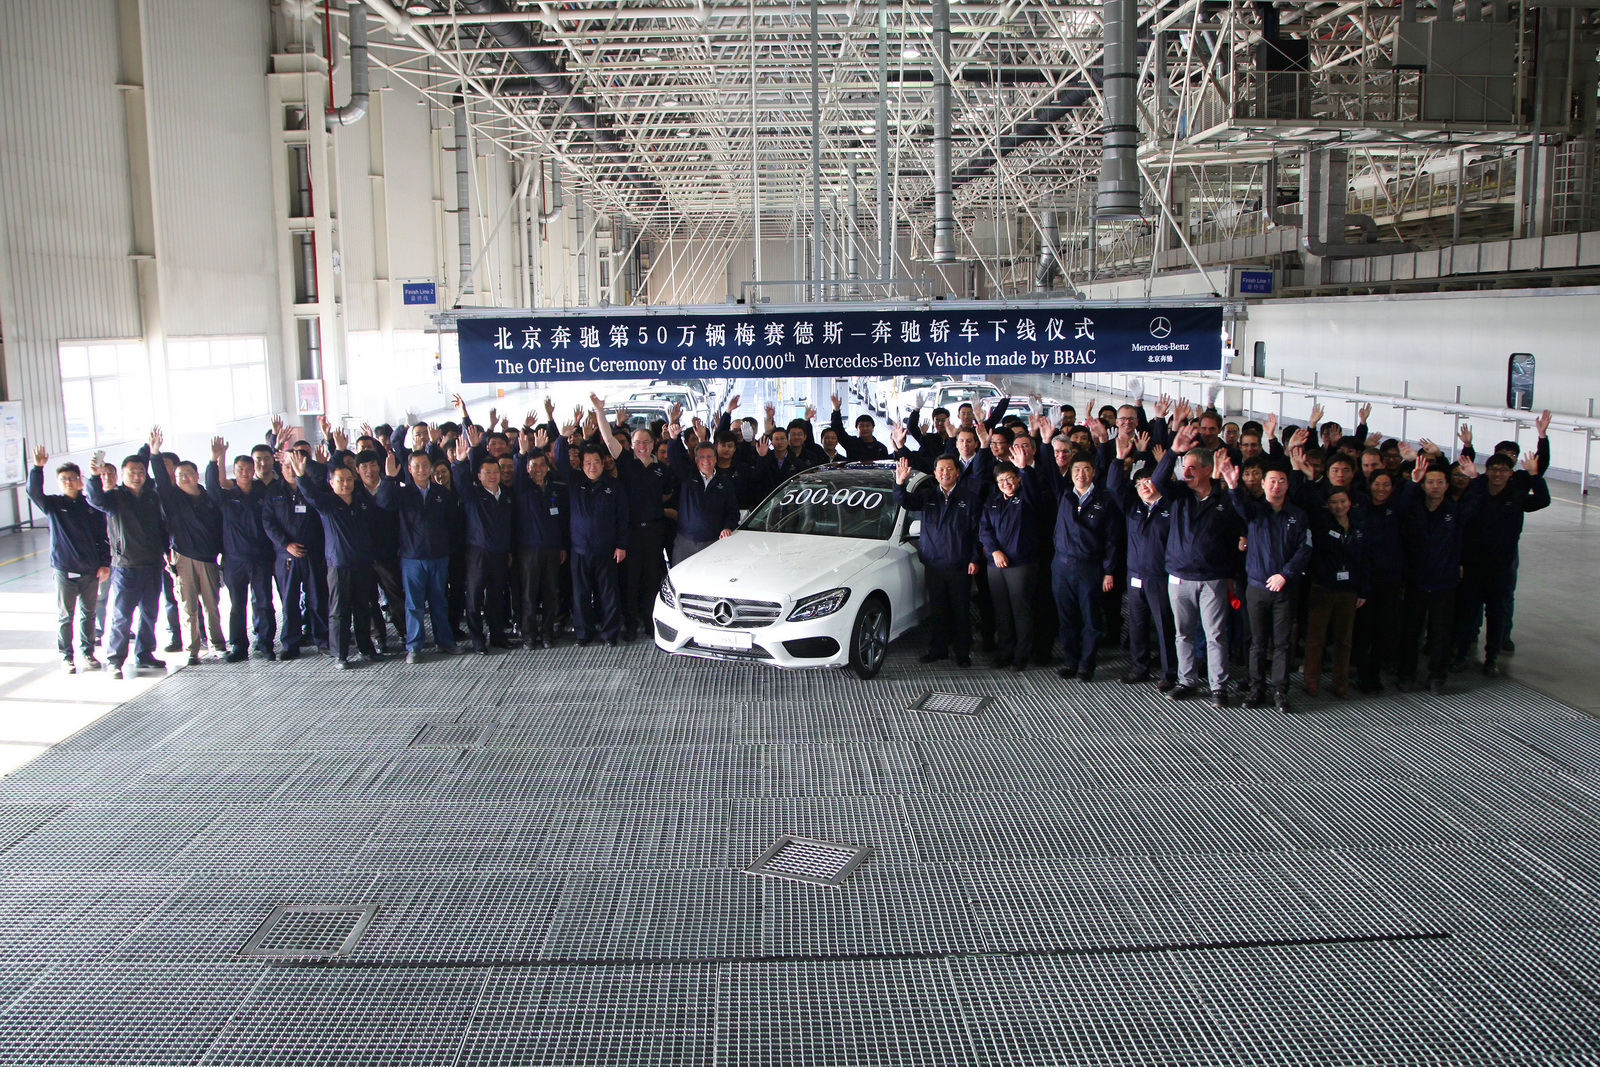 Mercedes-Benz-500000th-car-made-in-China-1